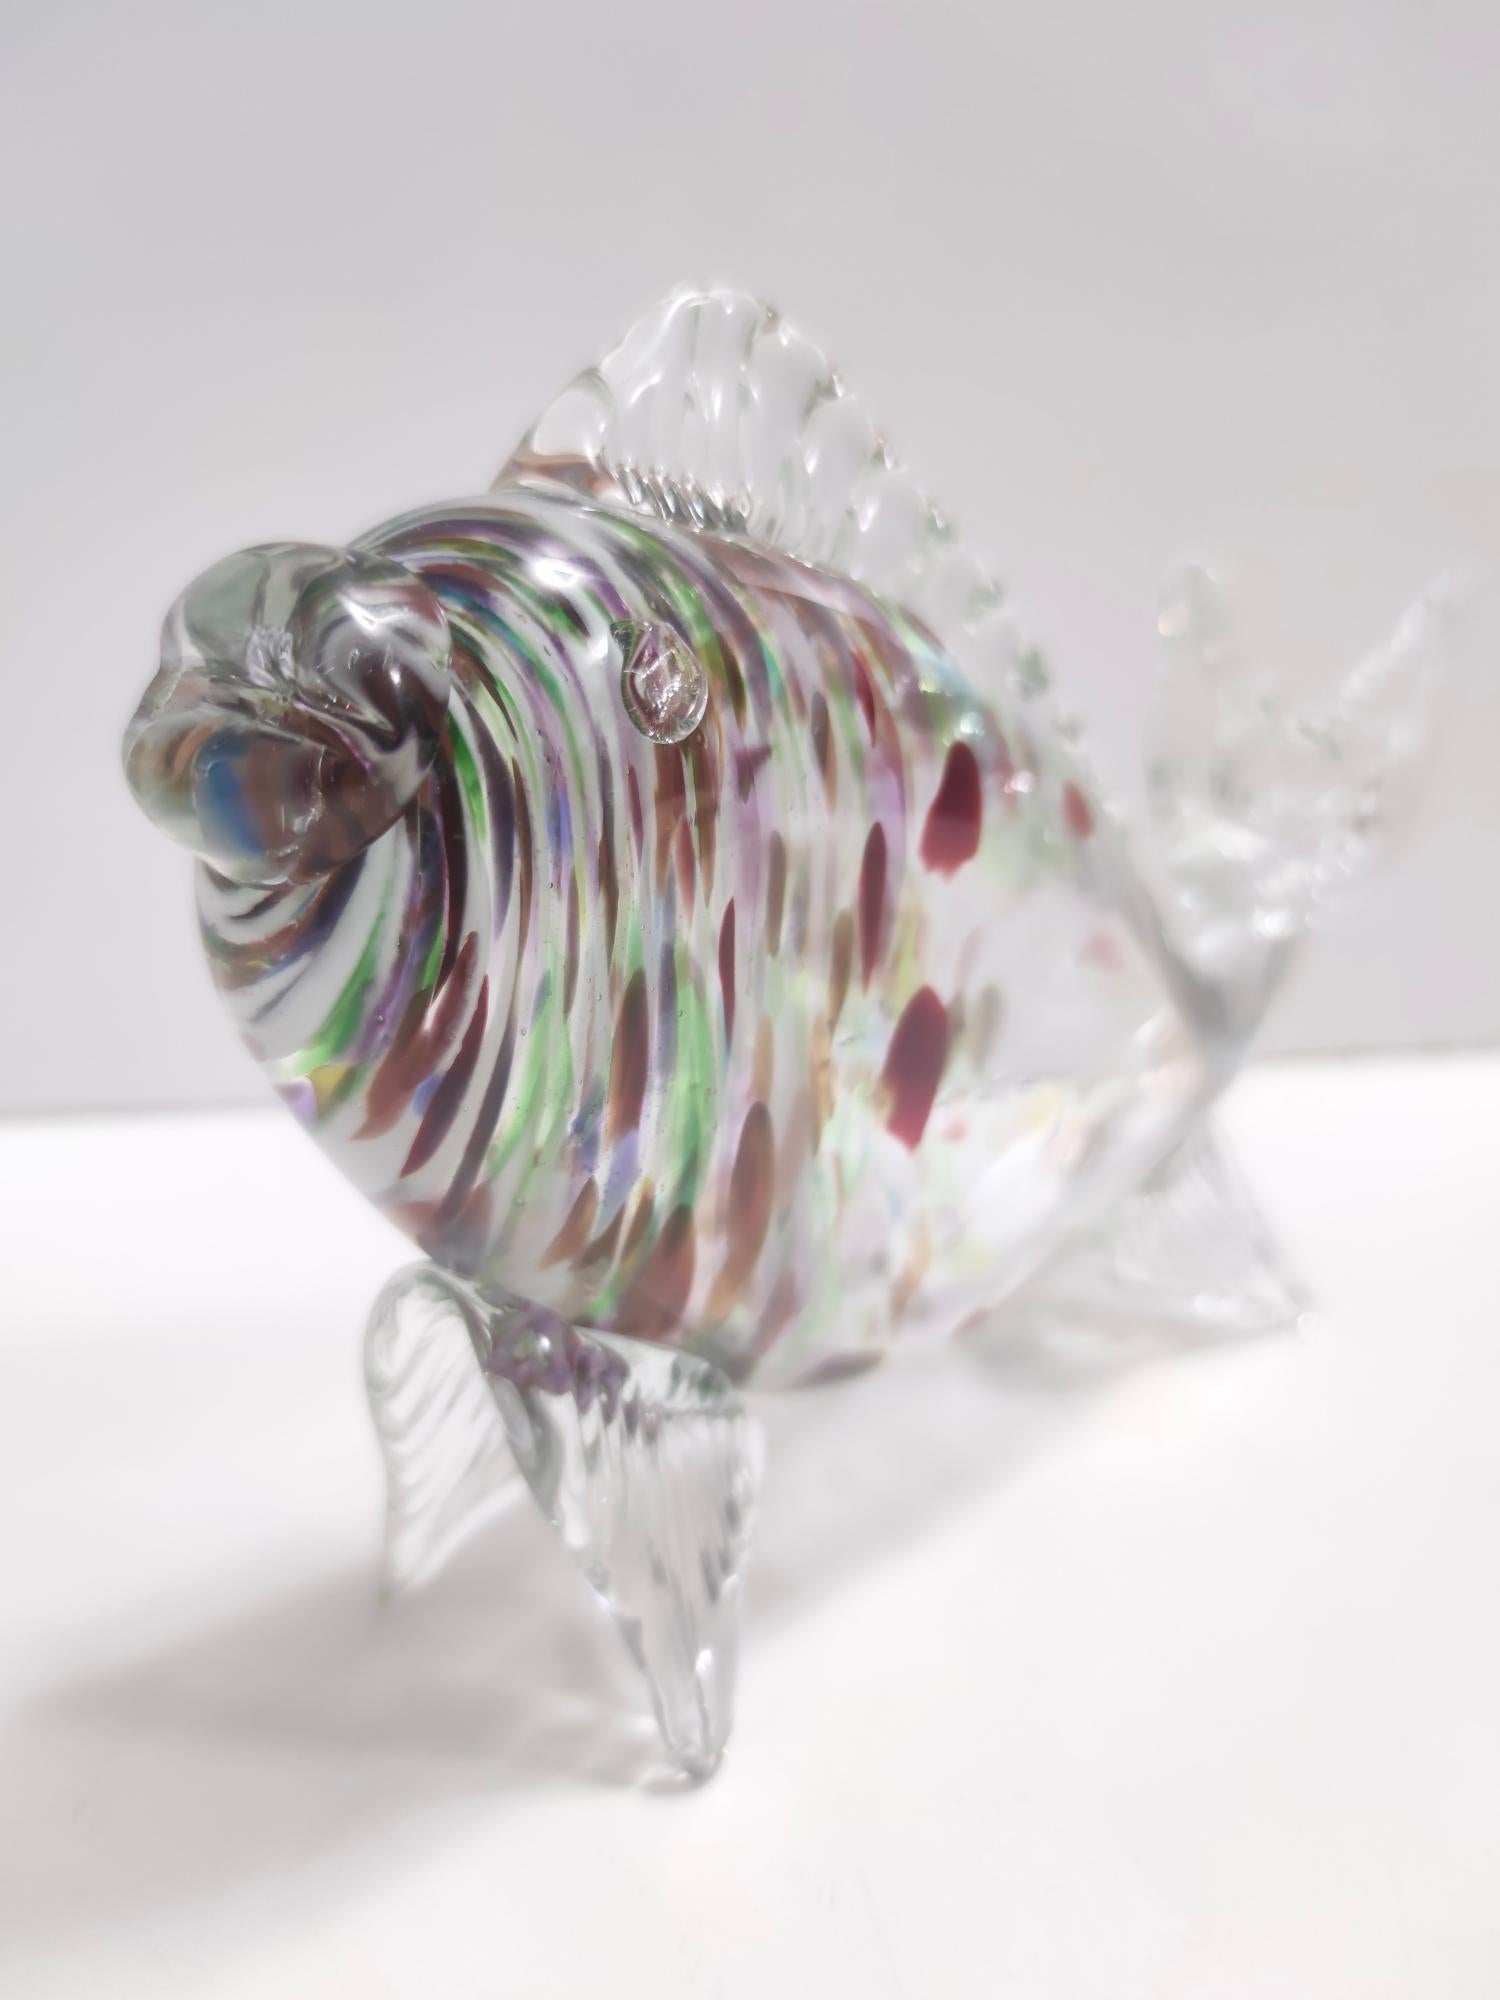 Mid-20th Century Vintage Murano Glass Fish Decorative Figurine by Fratelli Toso, Italy For Sale